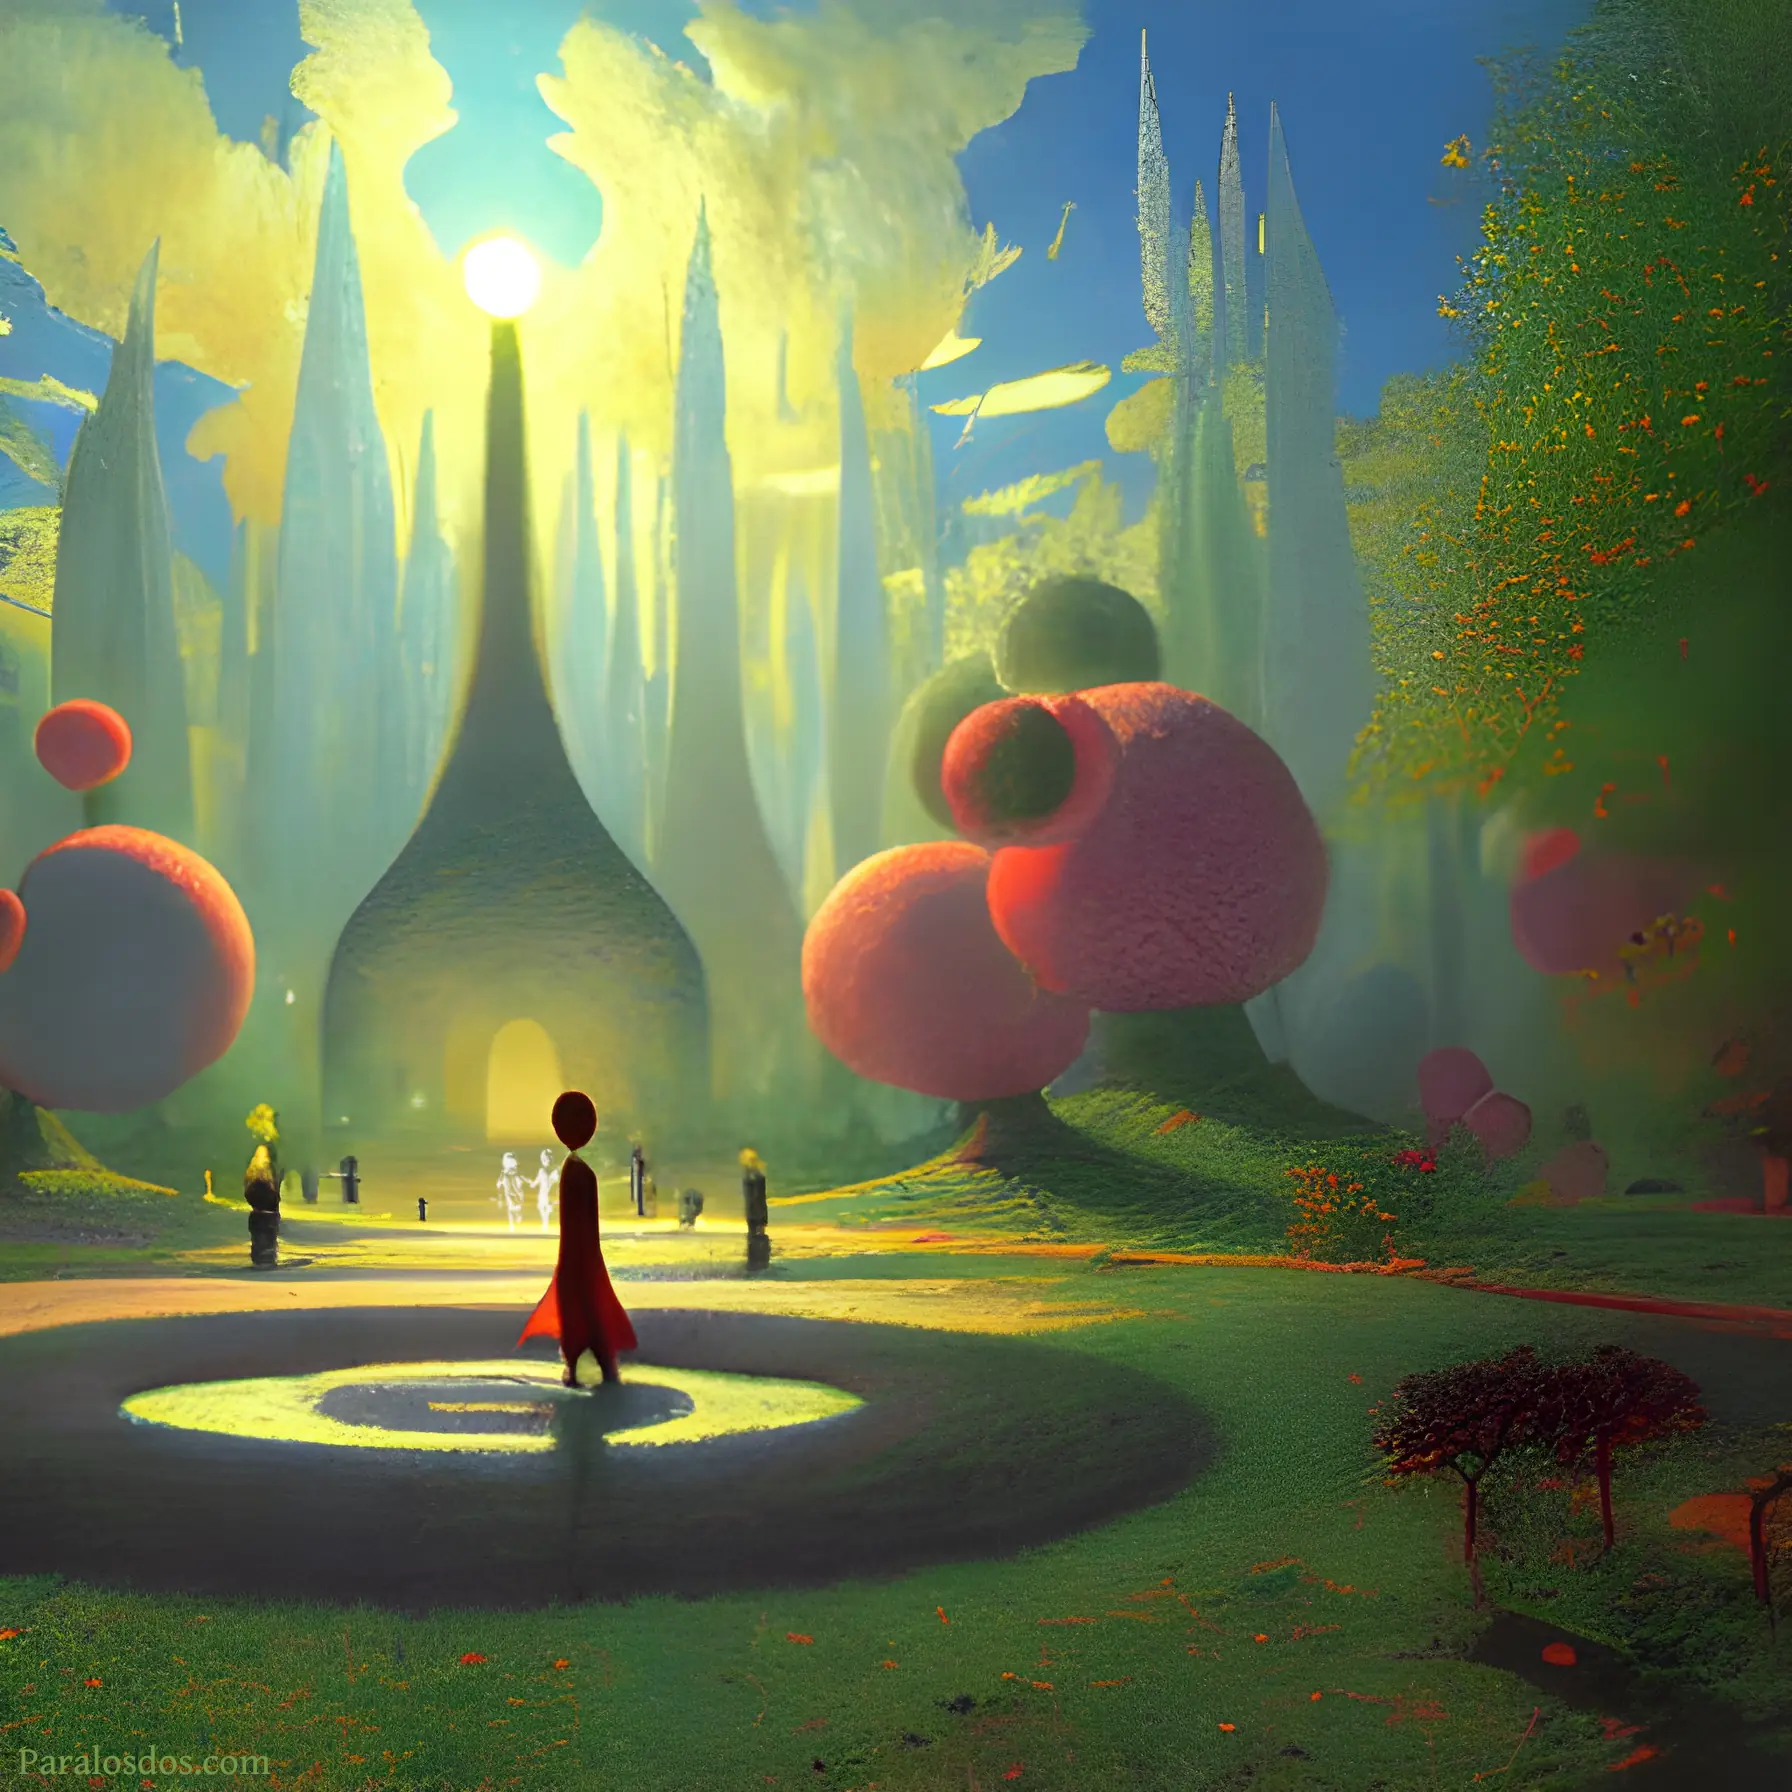 A fantastical artistic rendering of a vaguely futuristic scene in a park. There is a backlit doorway in a building in the background.